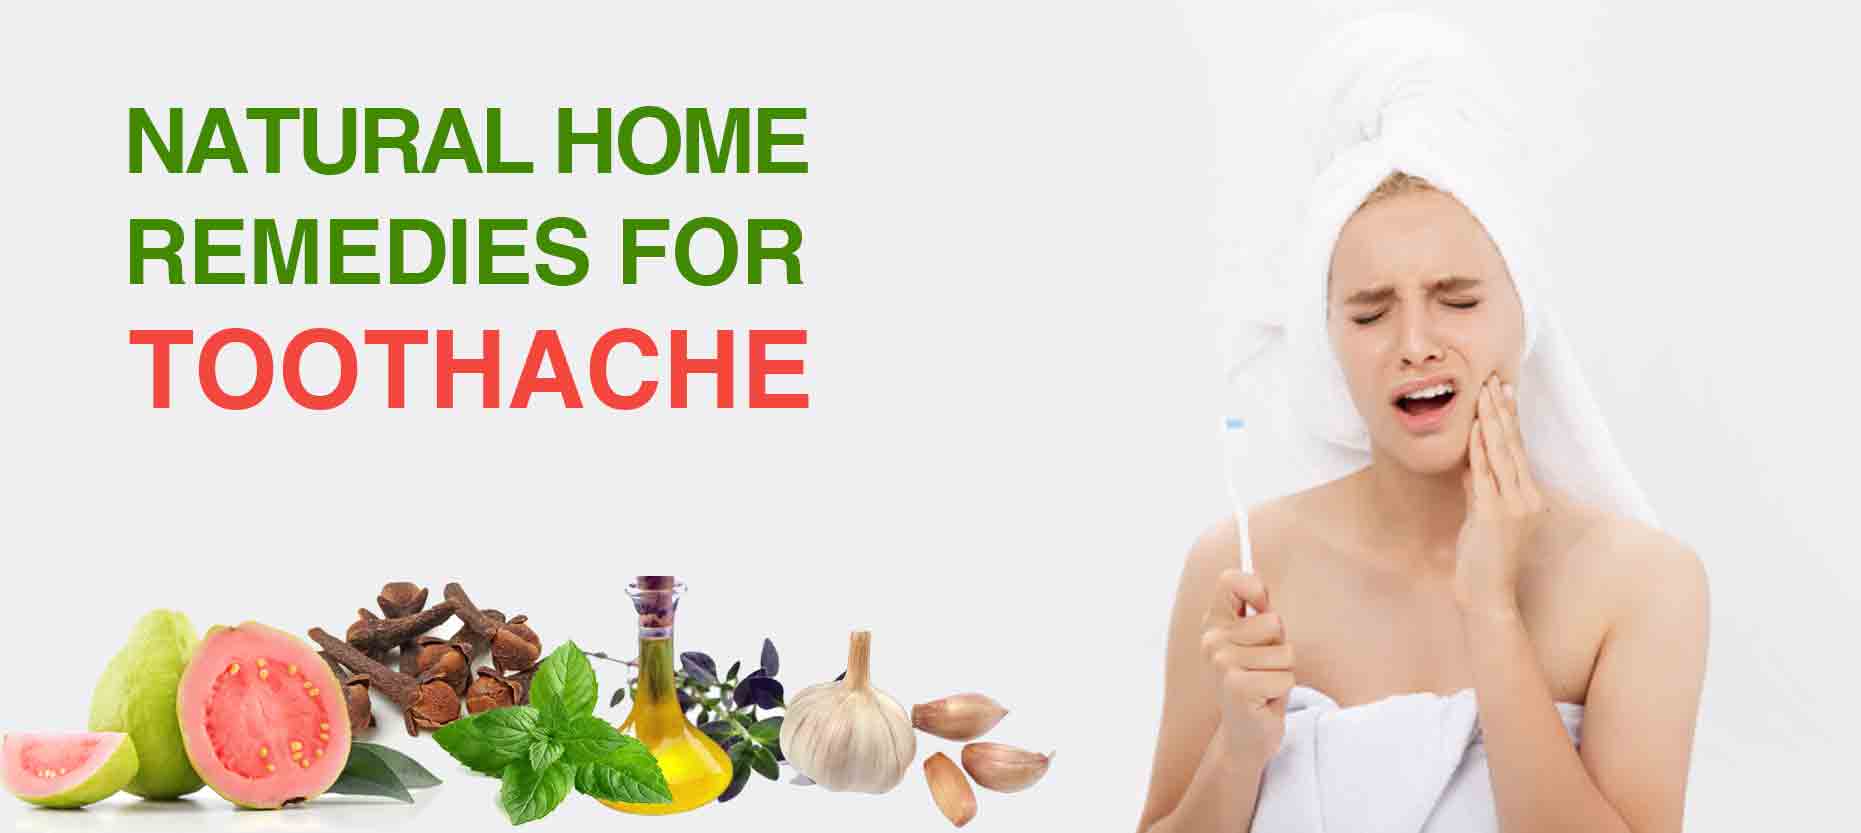 Natural Home Remedies for Toothache